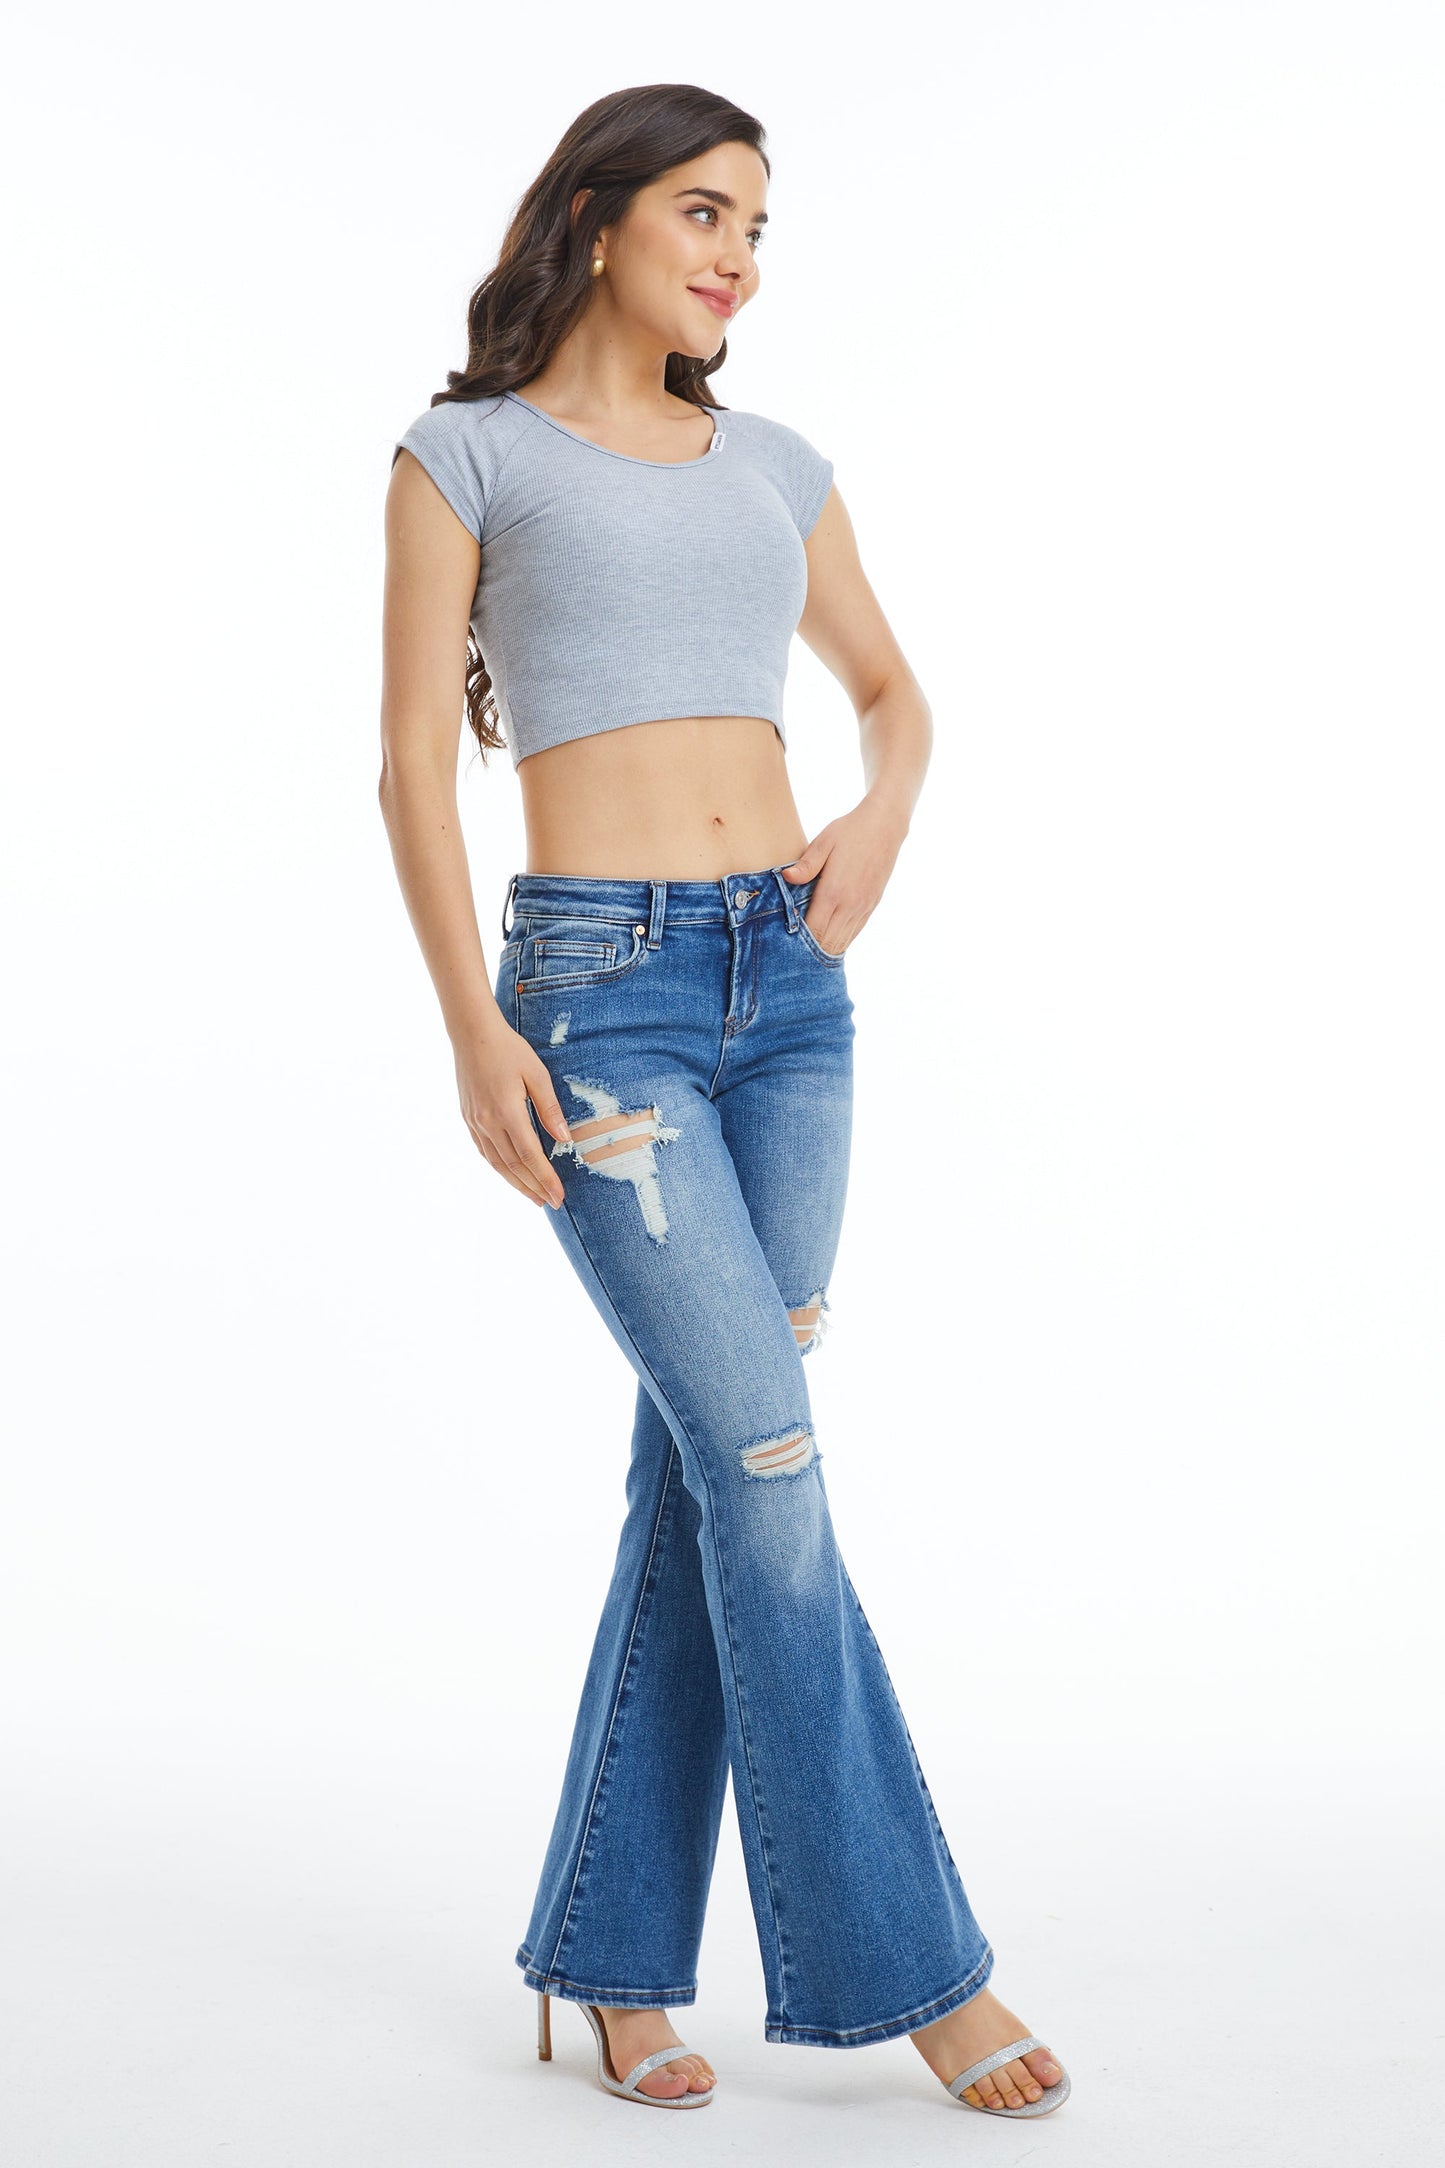 ALICE LOW RISE DISTRESSED FLARE JEANS BYF1131 (BYHE132) STELLAR